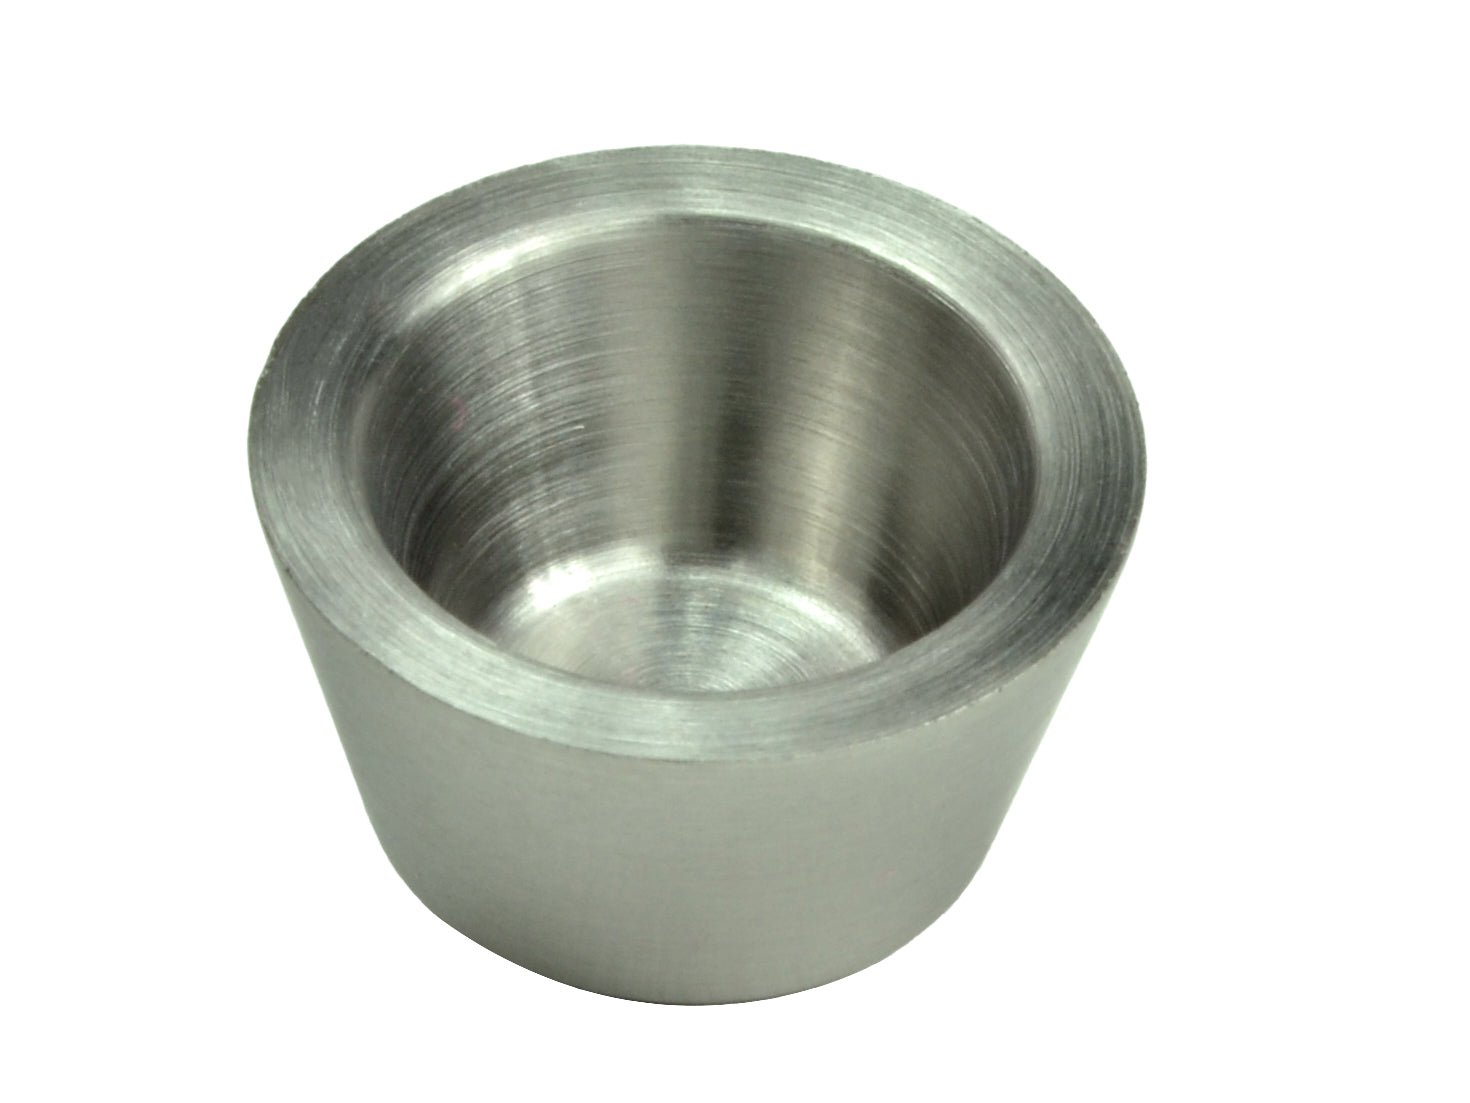 MSE PRO High Form 99.9% Purity Nickel Crucible with Lid